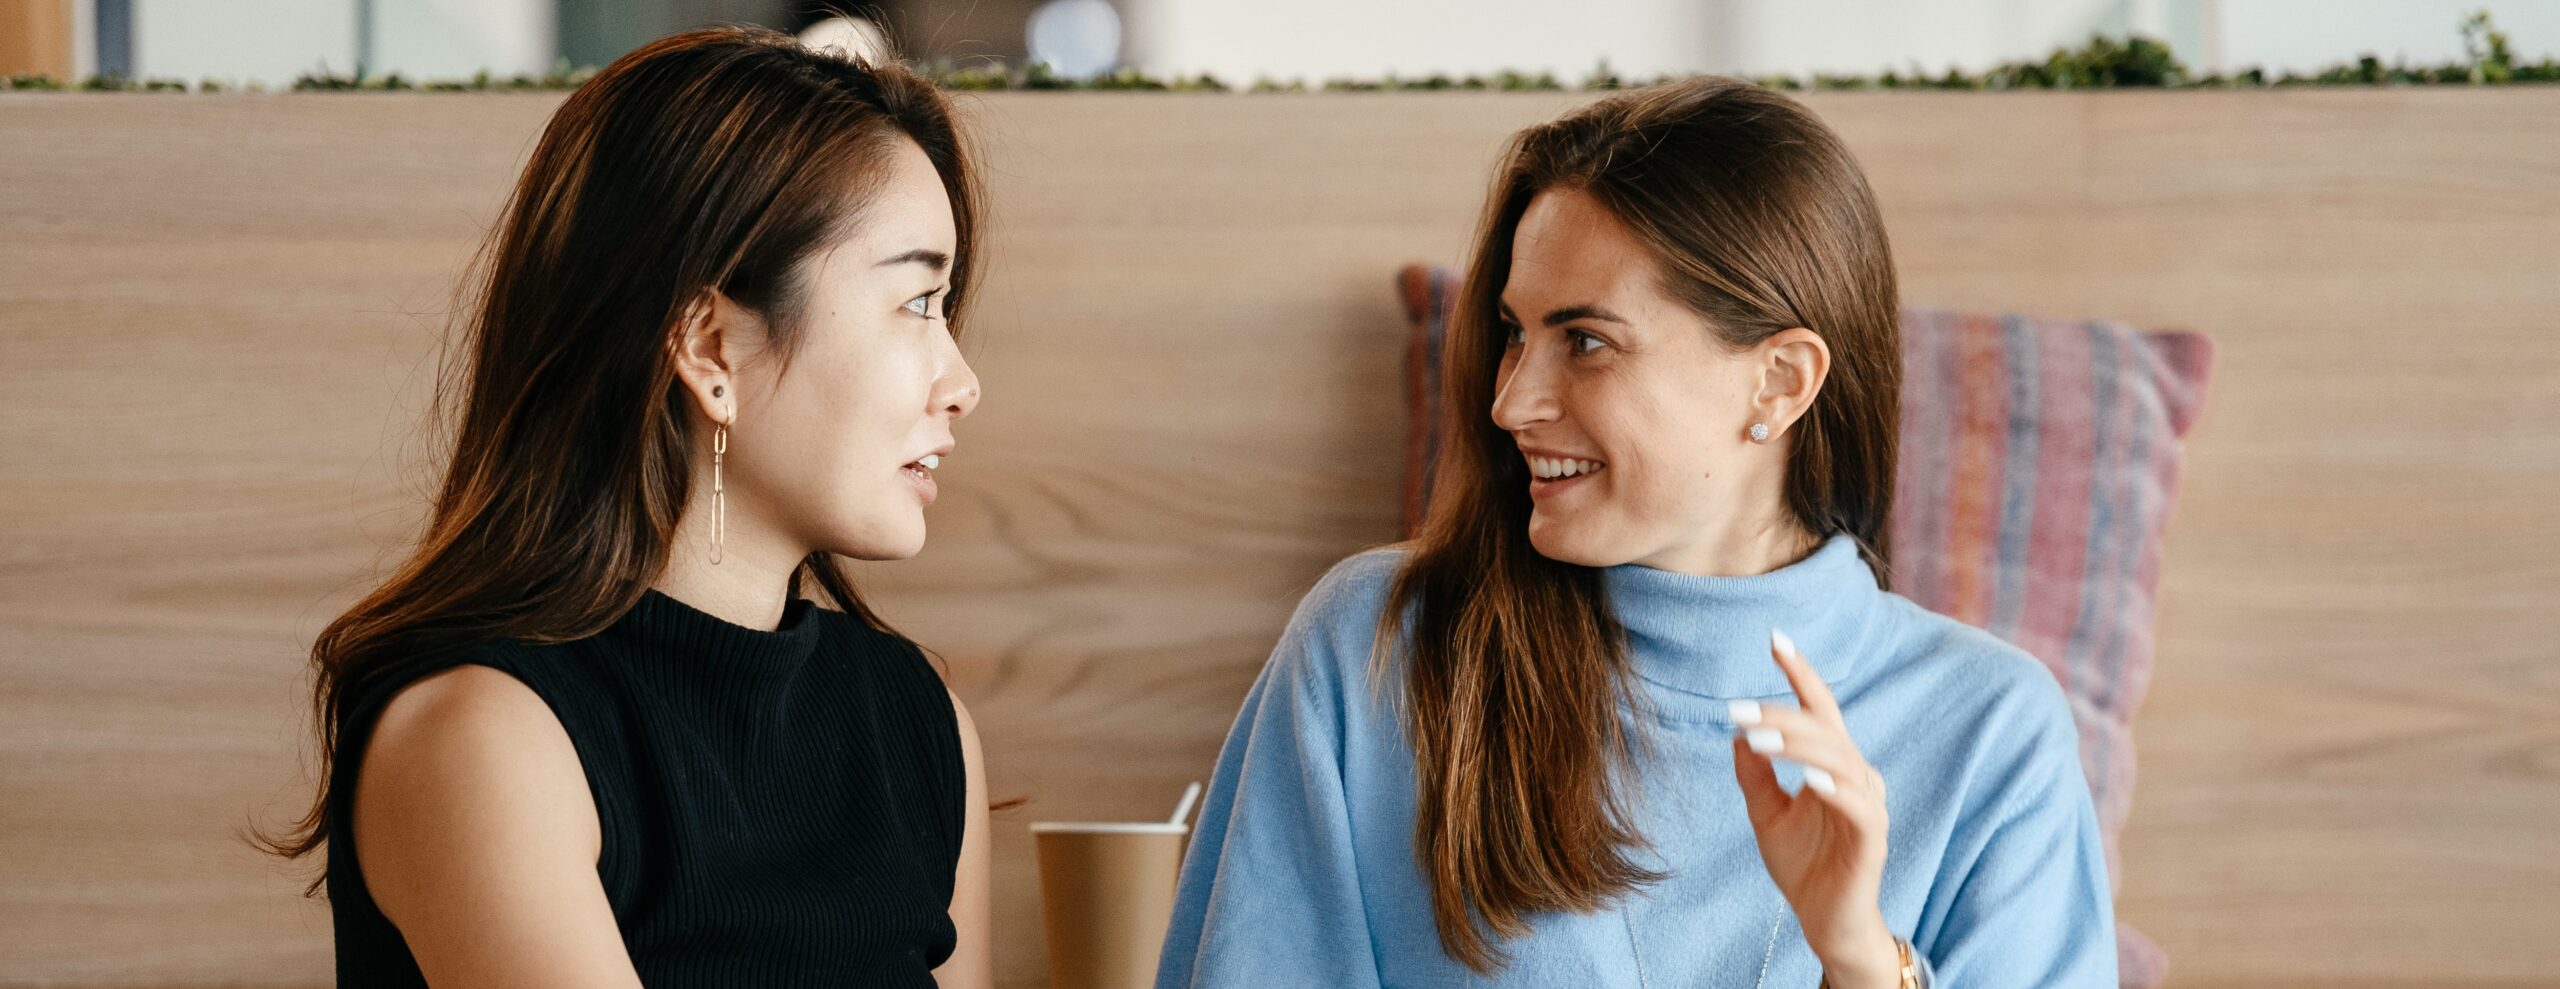 The Art of Connection: How to Strengthen Client Relationships through Meaningful Conversation